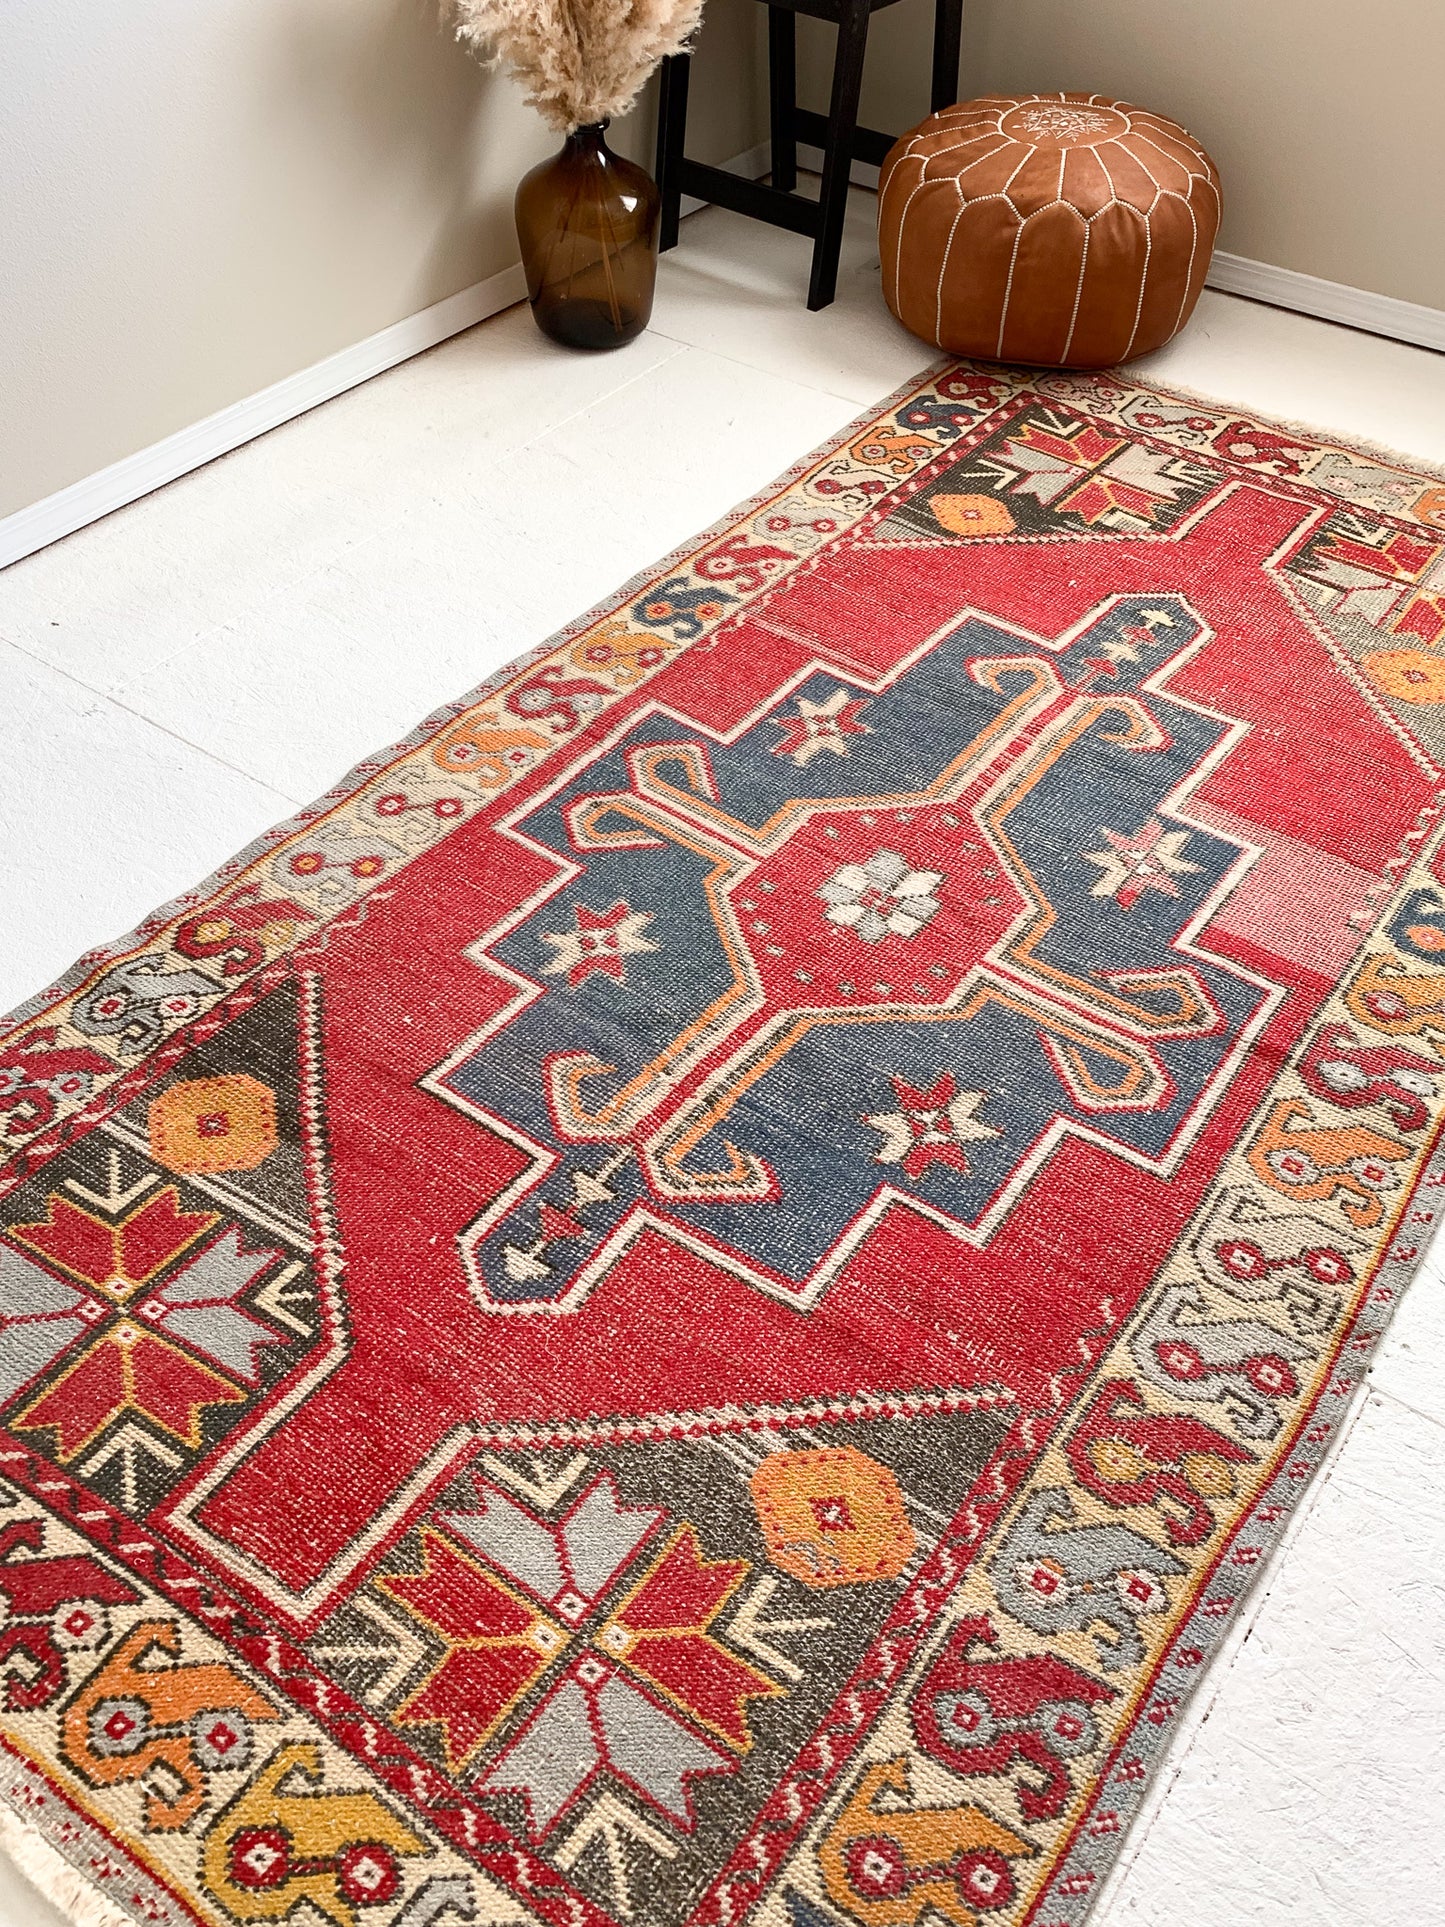 Reserved for Kathy - No. A1074 - 4.1' x 8.2' Vintage Turkish Area Rug